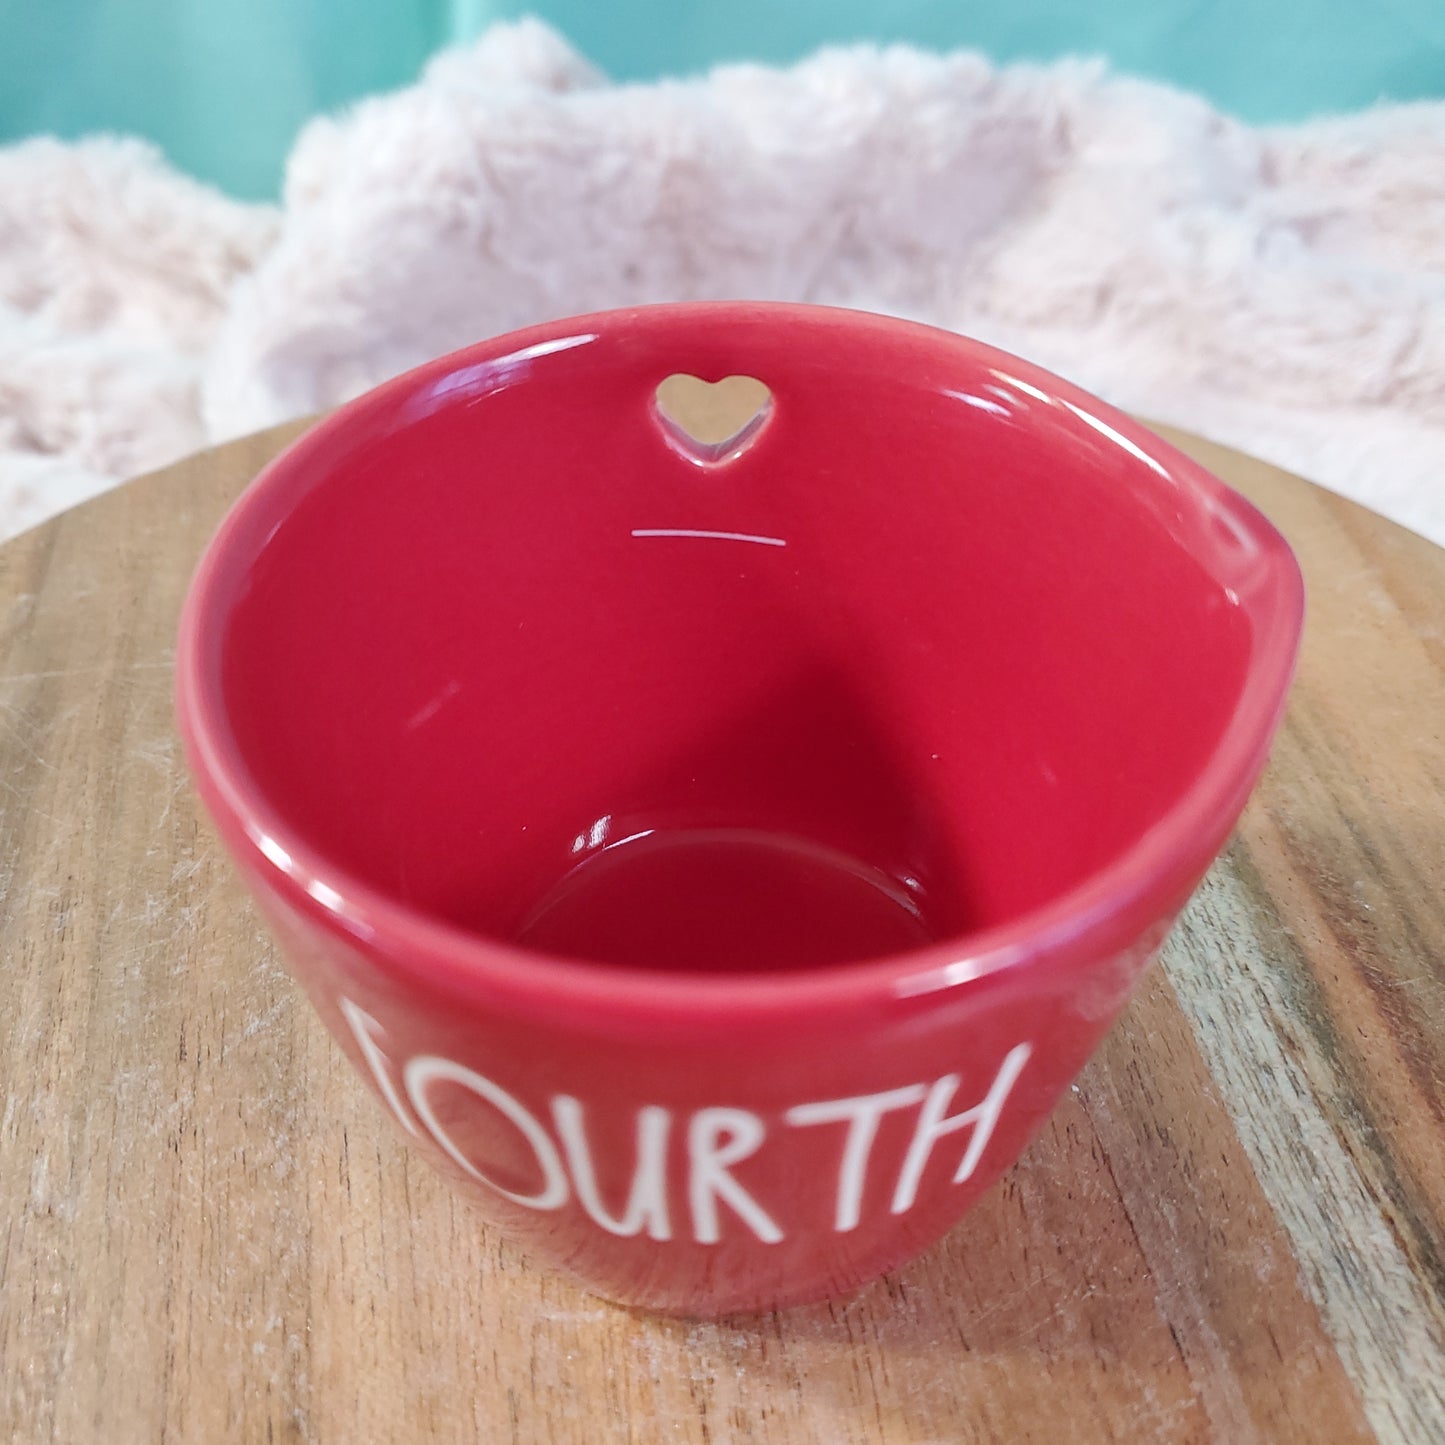 Rae Dunn Valentine's Day Red Ceramic Measuring Cups - Set of 4